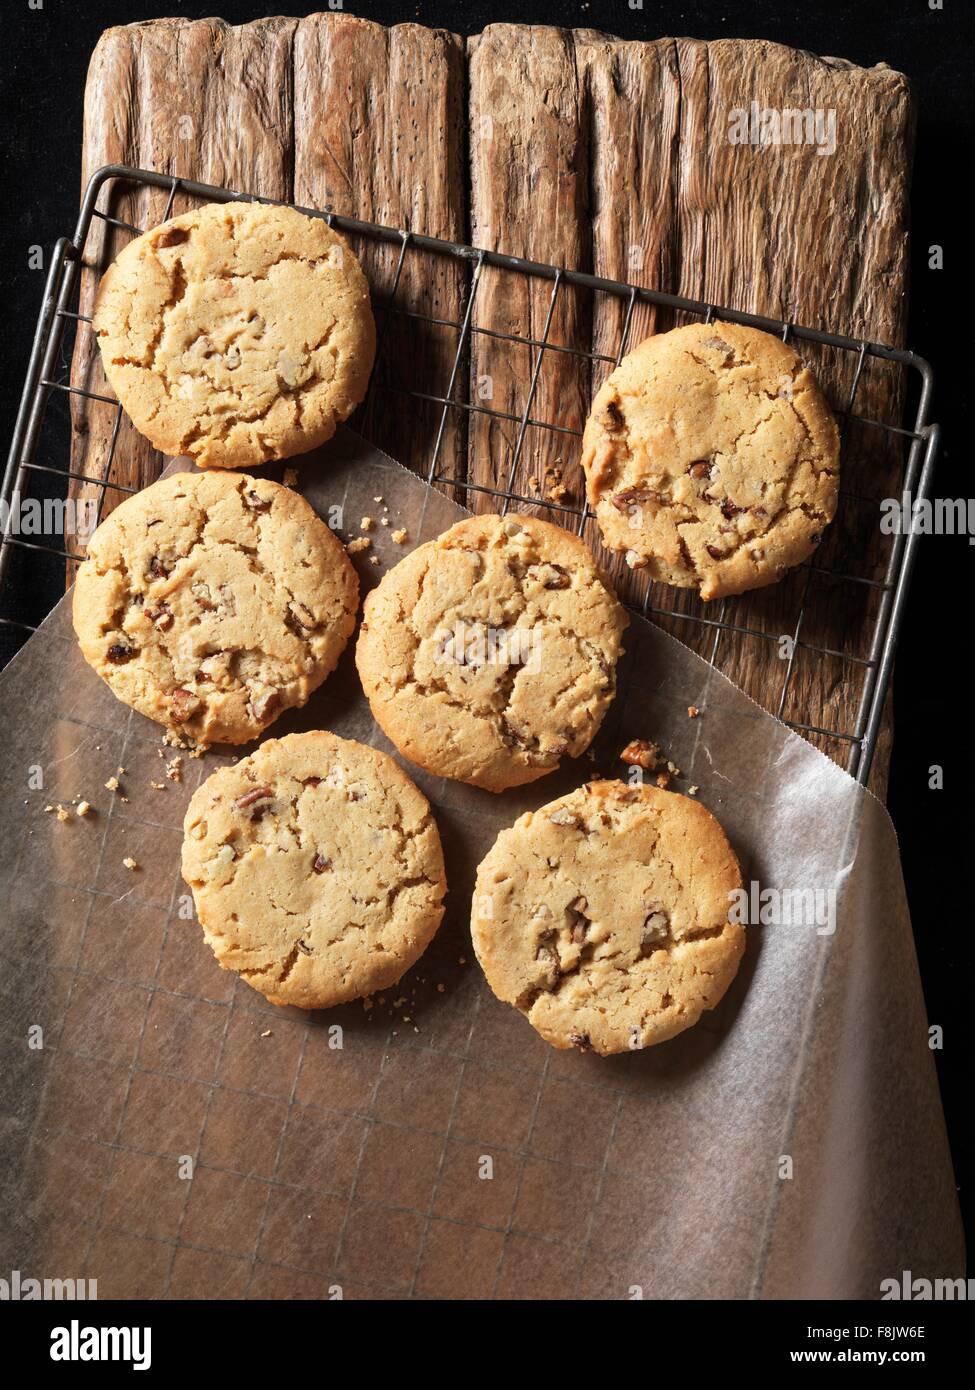 Overhead view of crunchy maple and pecan cookies on wood Stock Photo